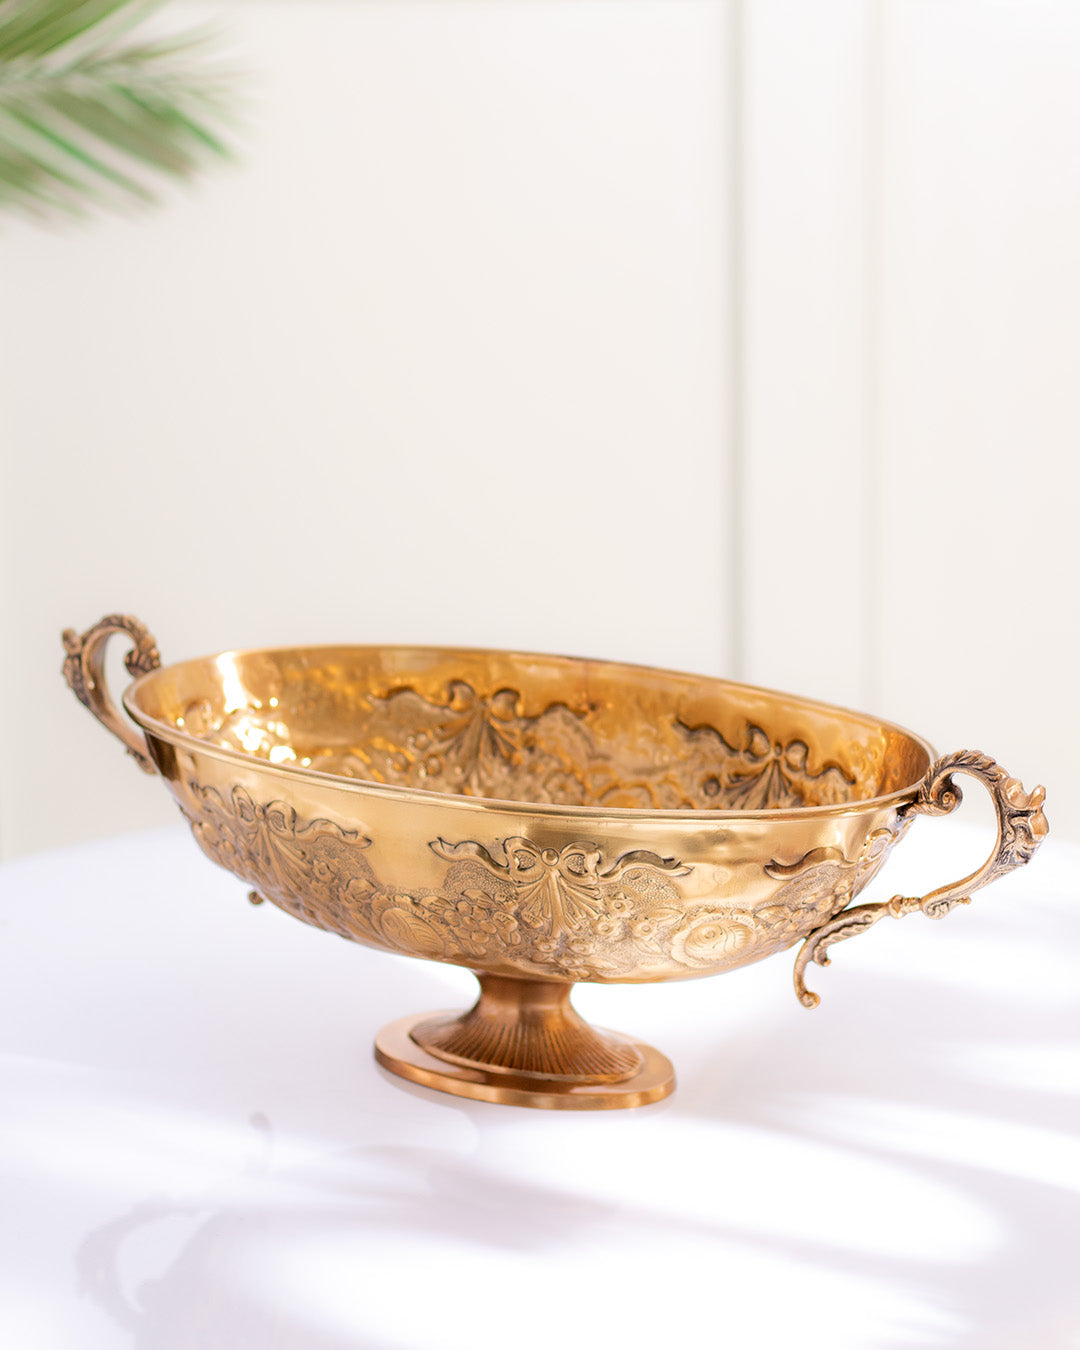 Embossed Brass Handcrafted Bowl - Large 15"